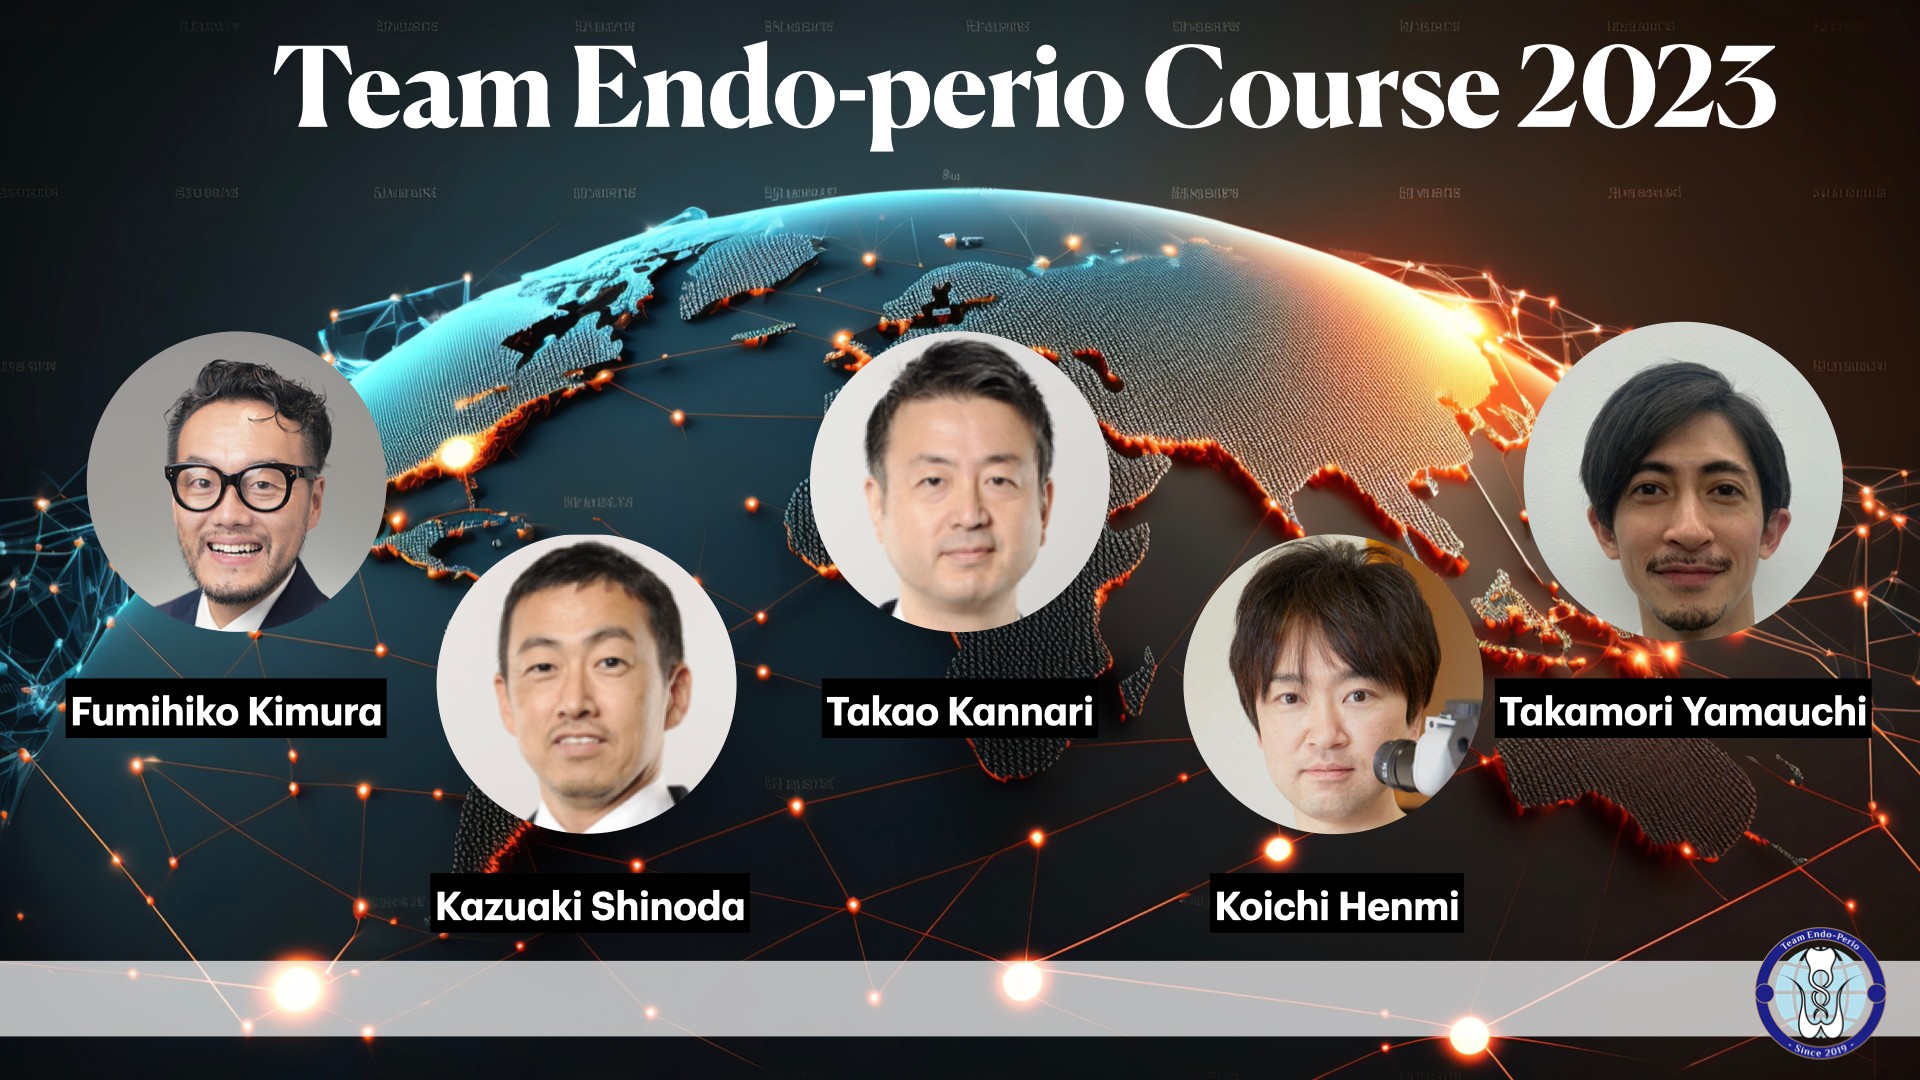 Team Endo-perio hands on course 2023セミナー